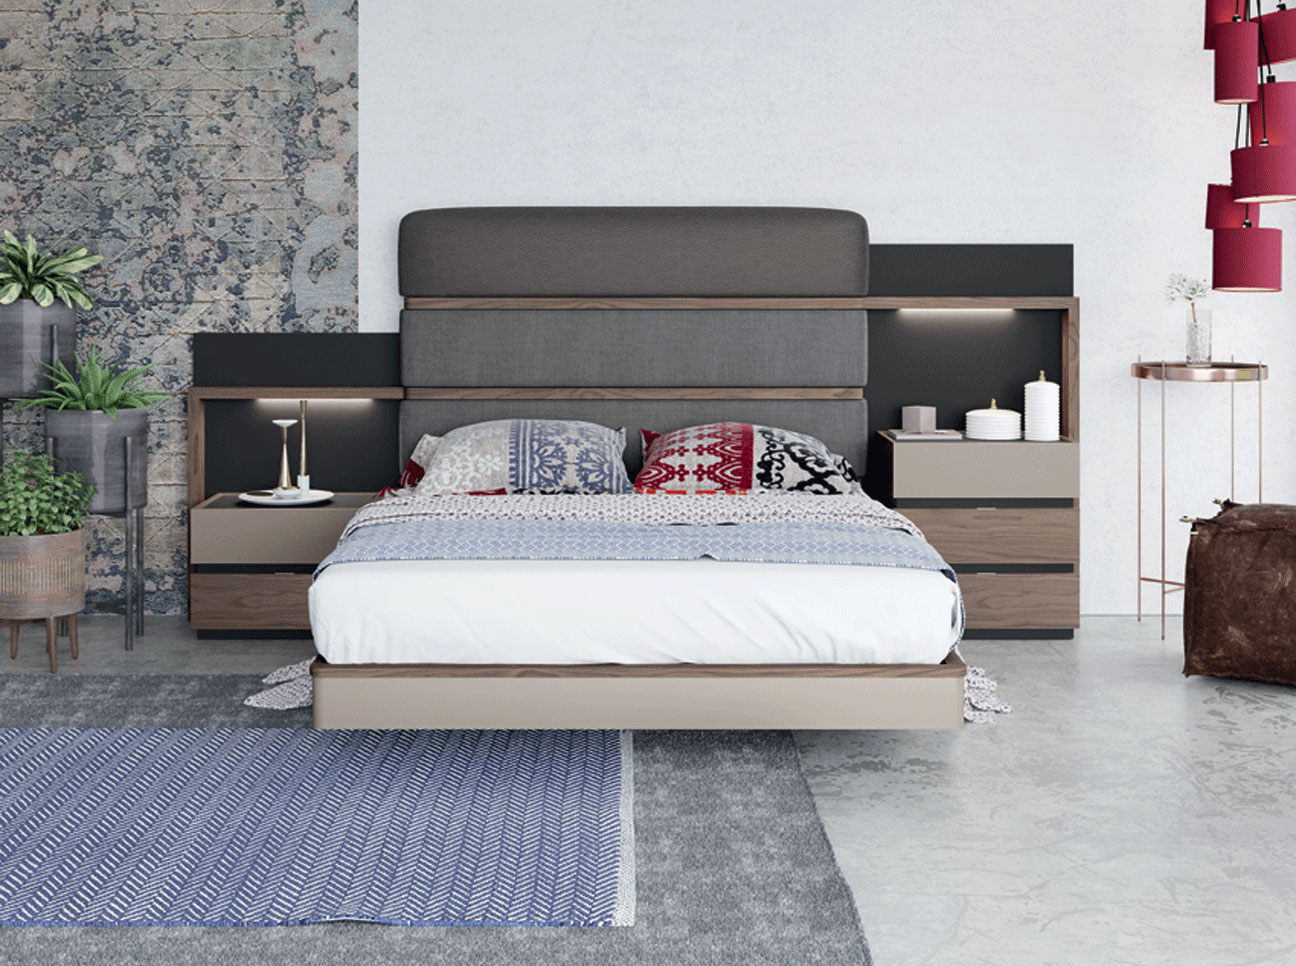 Sophisticated Quality Luxury Bedroom Sets with Padded Bed - Click Image to Close